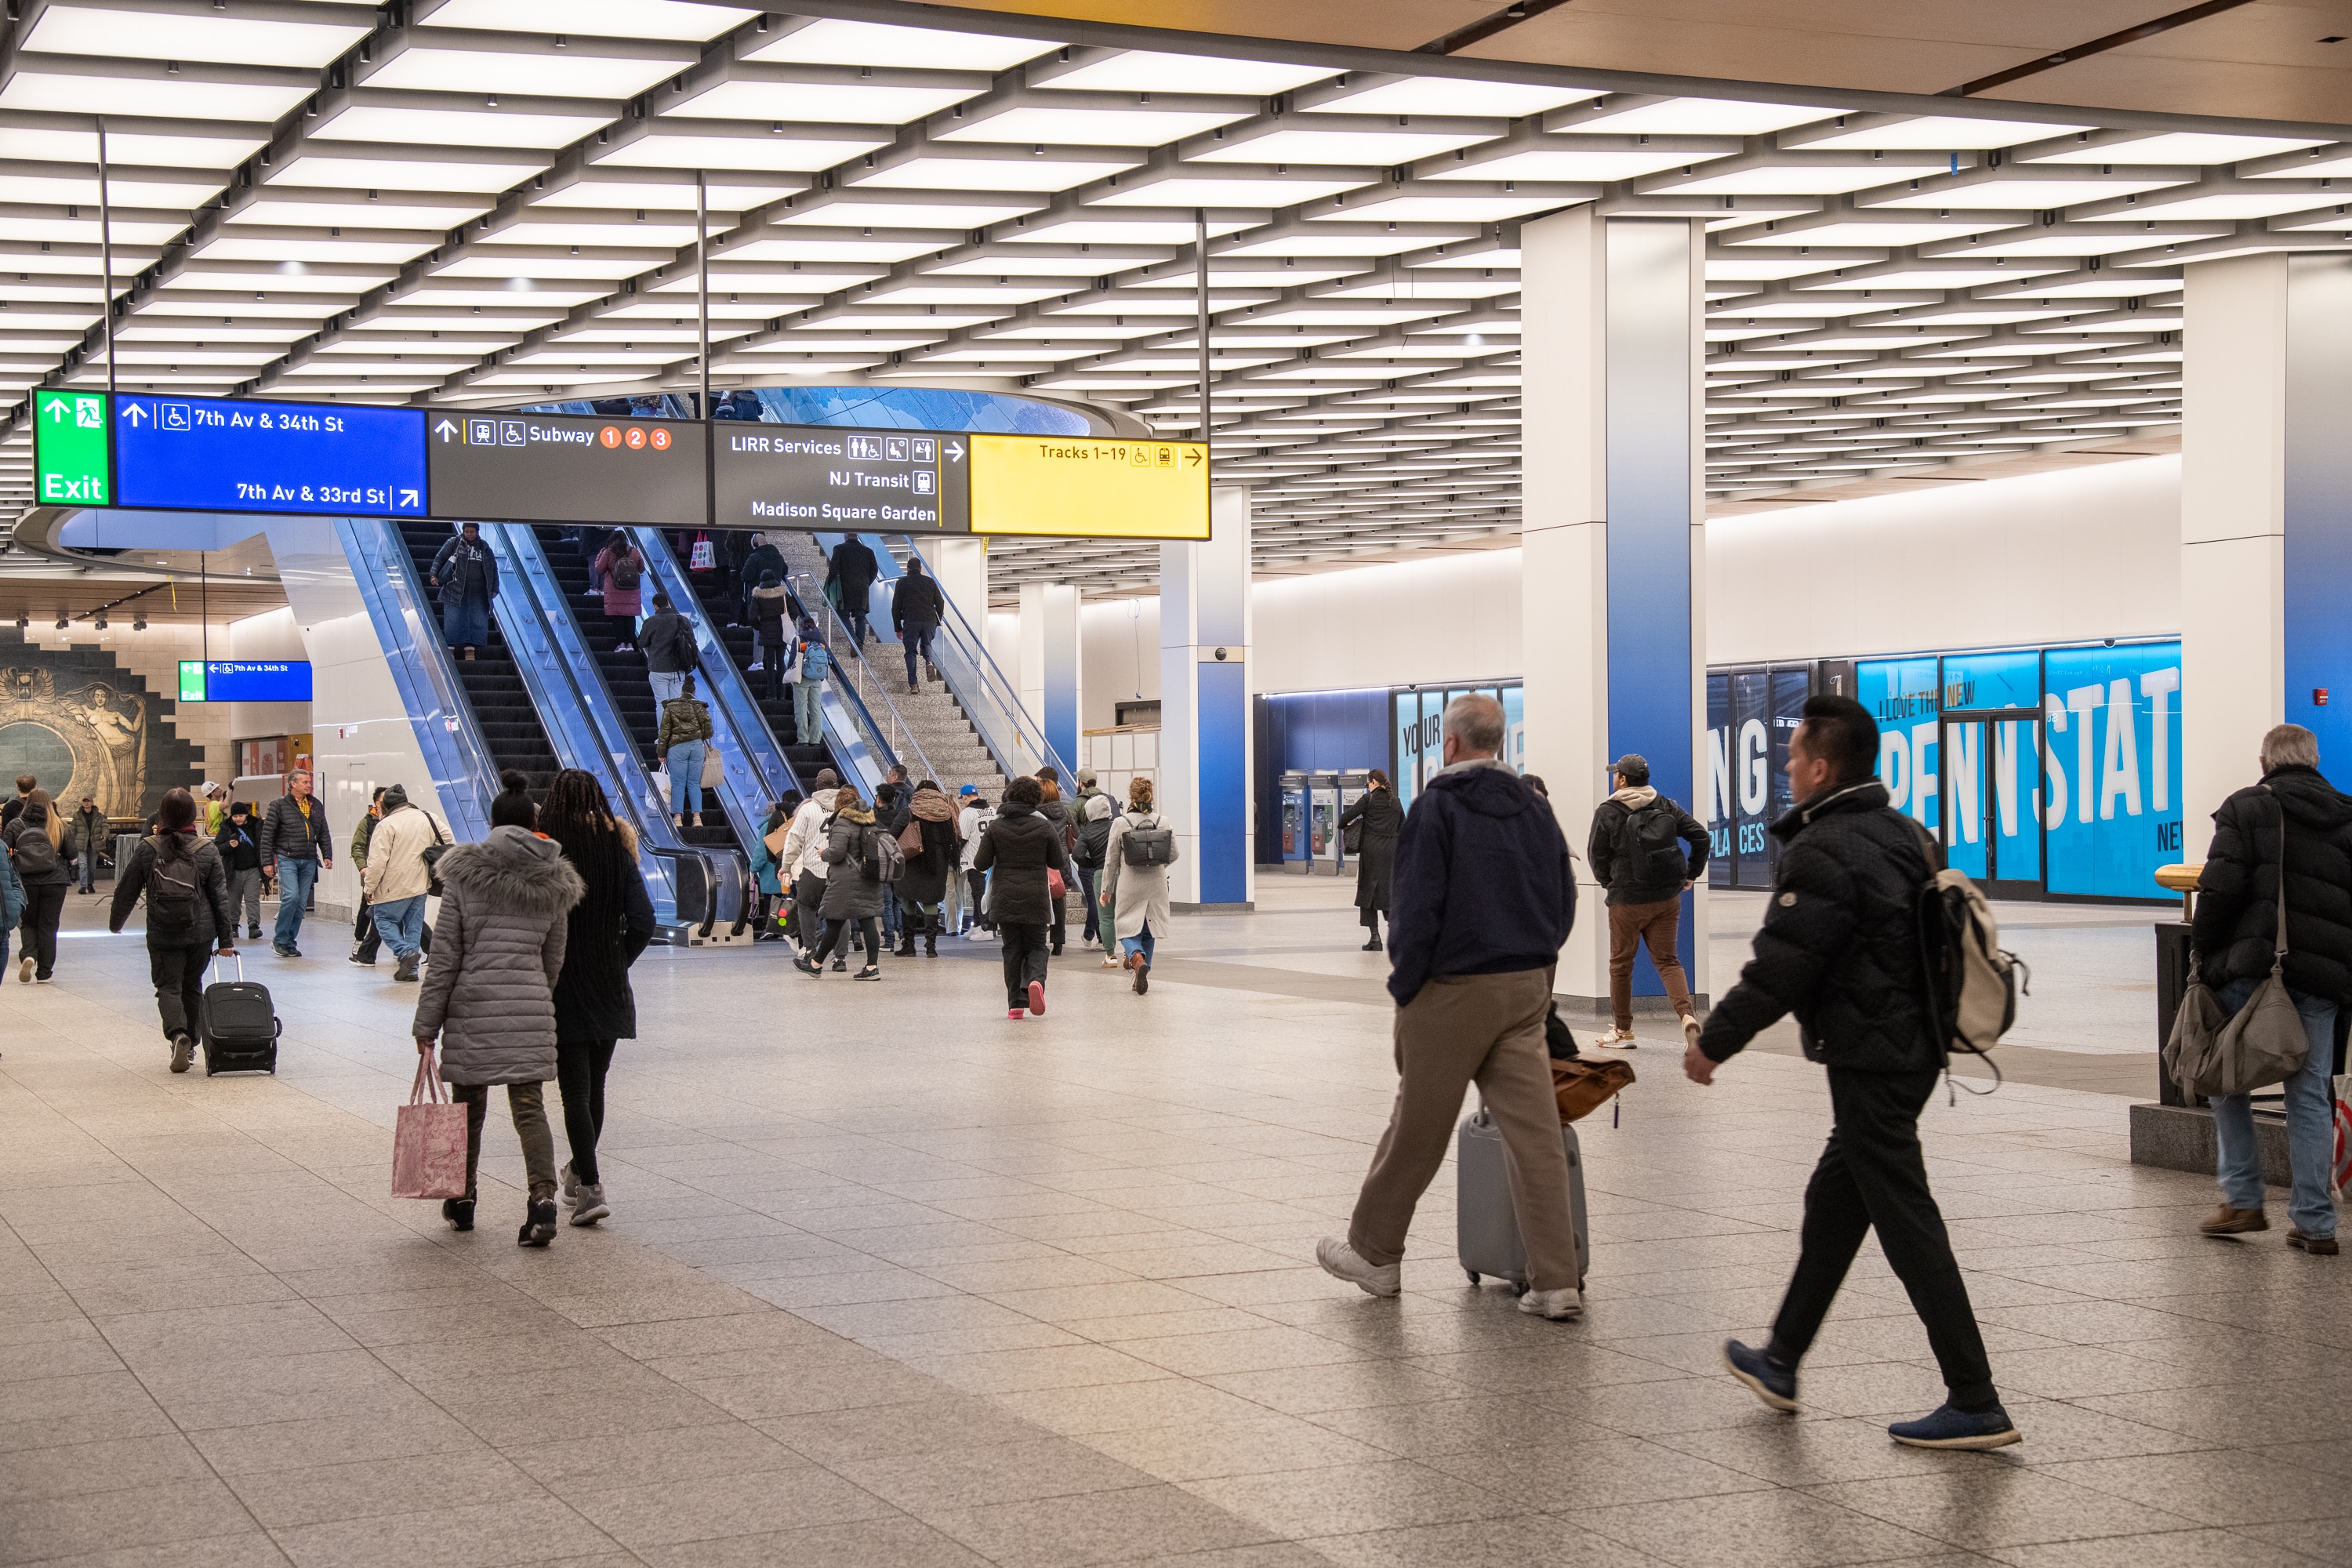 Statement from MTA Chief, External Relations John J. McCarthy on Preliminary Design Process for Penn Station Reconstruction